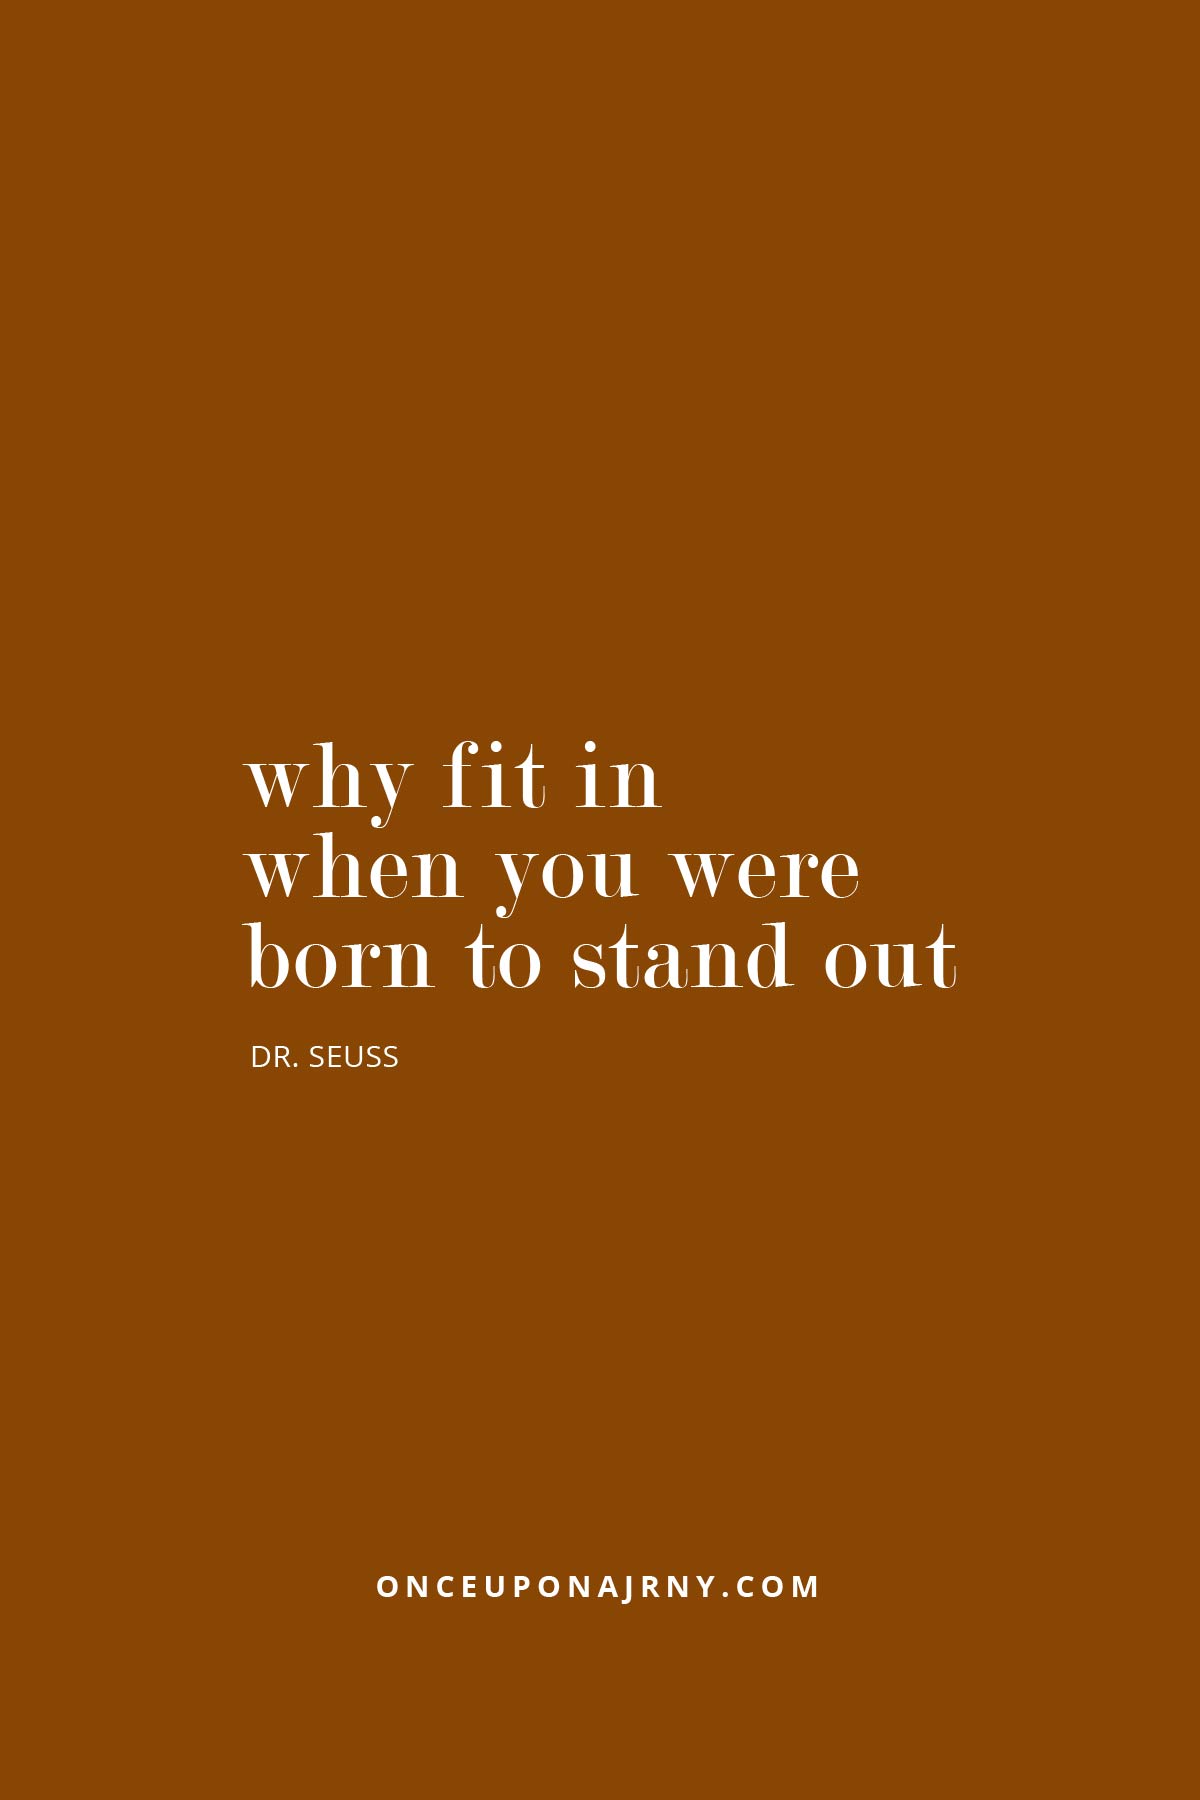 Why fit in when you were born to stand out - Dr. Seuss queer quotes pride